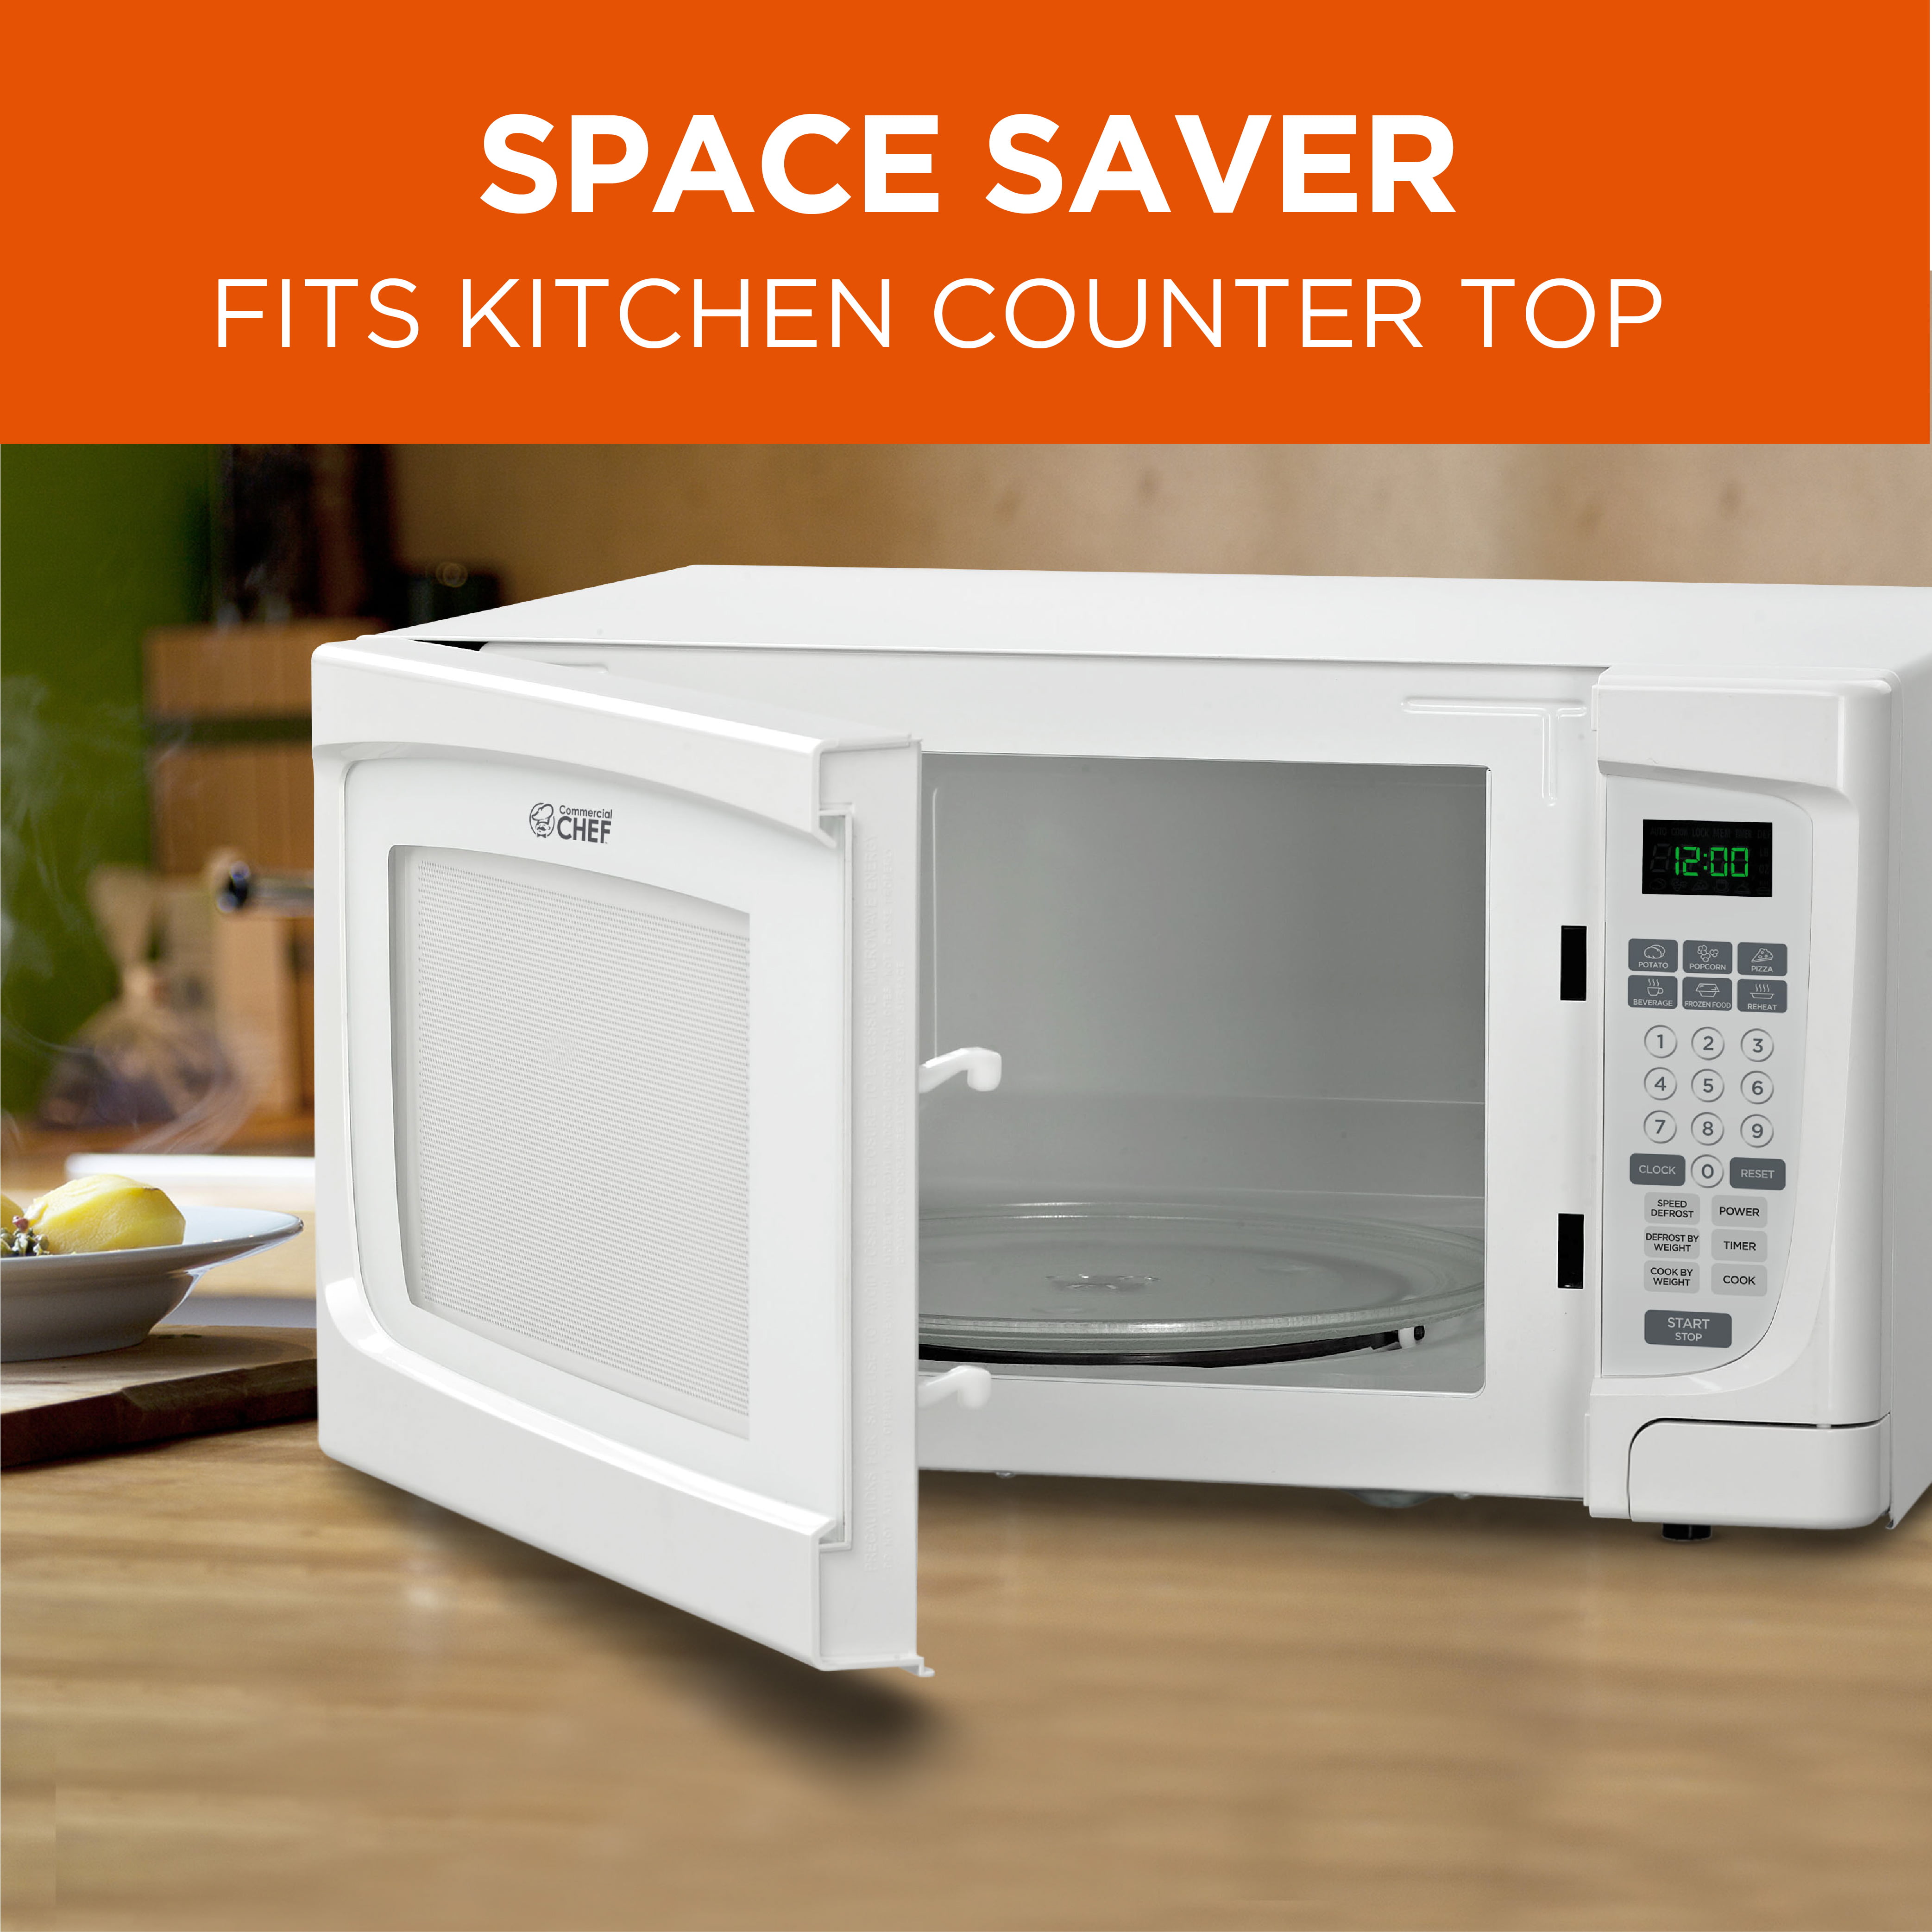 COMMERCIAL CHEF 0.6 Cubic Foot Microwave with 6 Power Levels